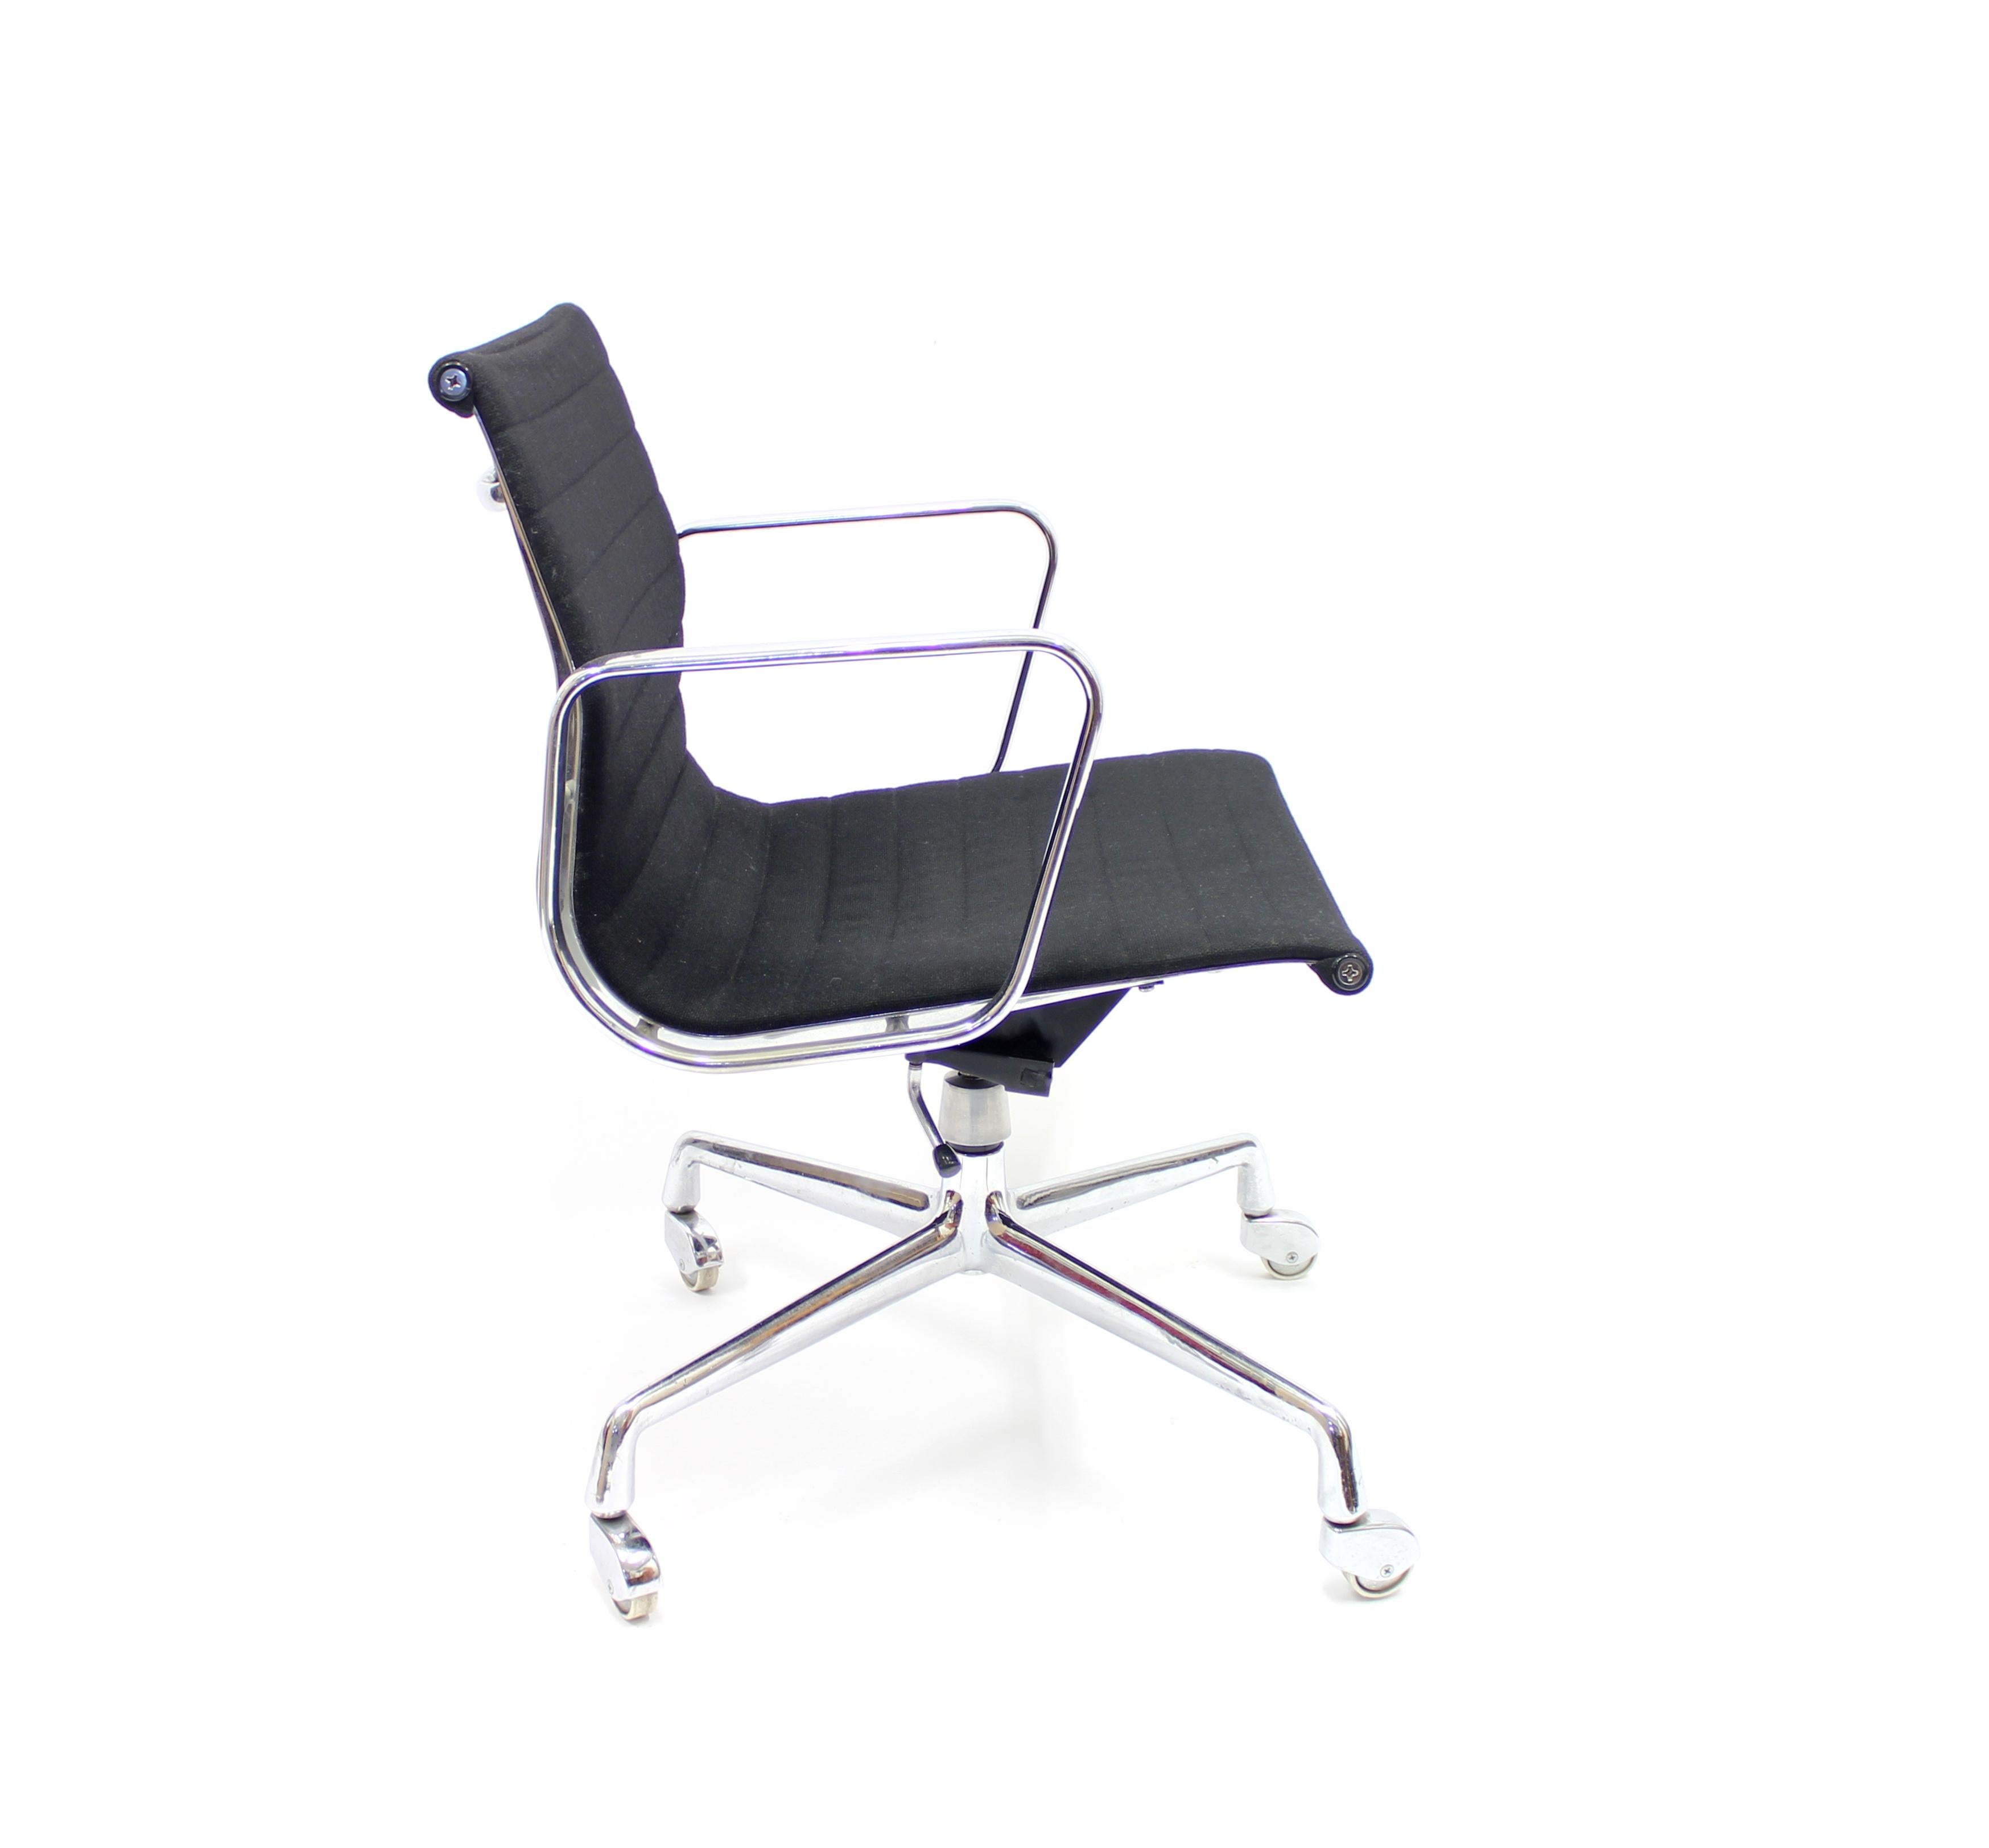 American Vintage EA 117 Office Chair by Charles and Ray Eames for Herman Miller, 1958